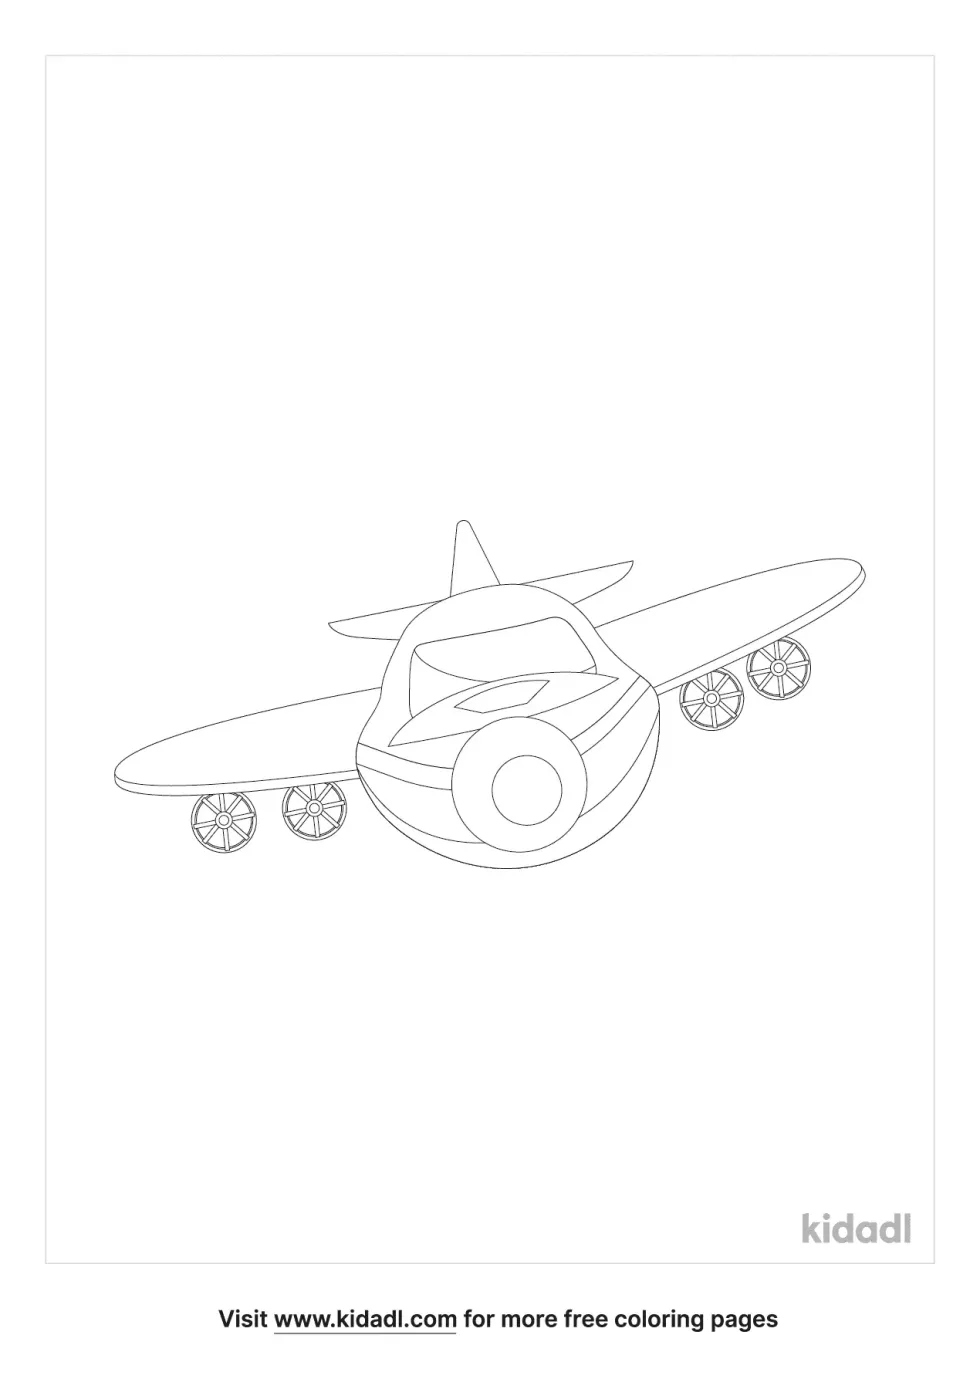 Front Of A Plane Coloring Page